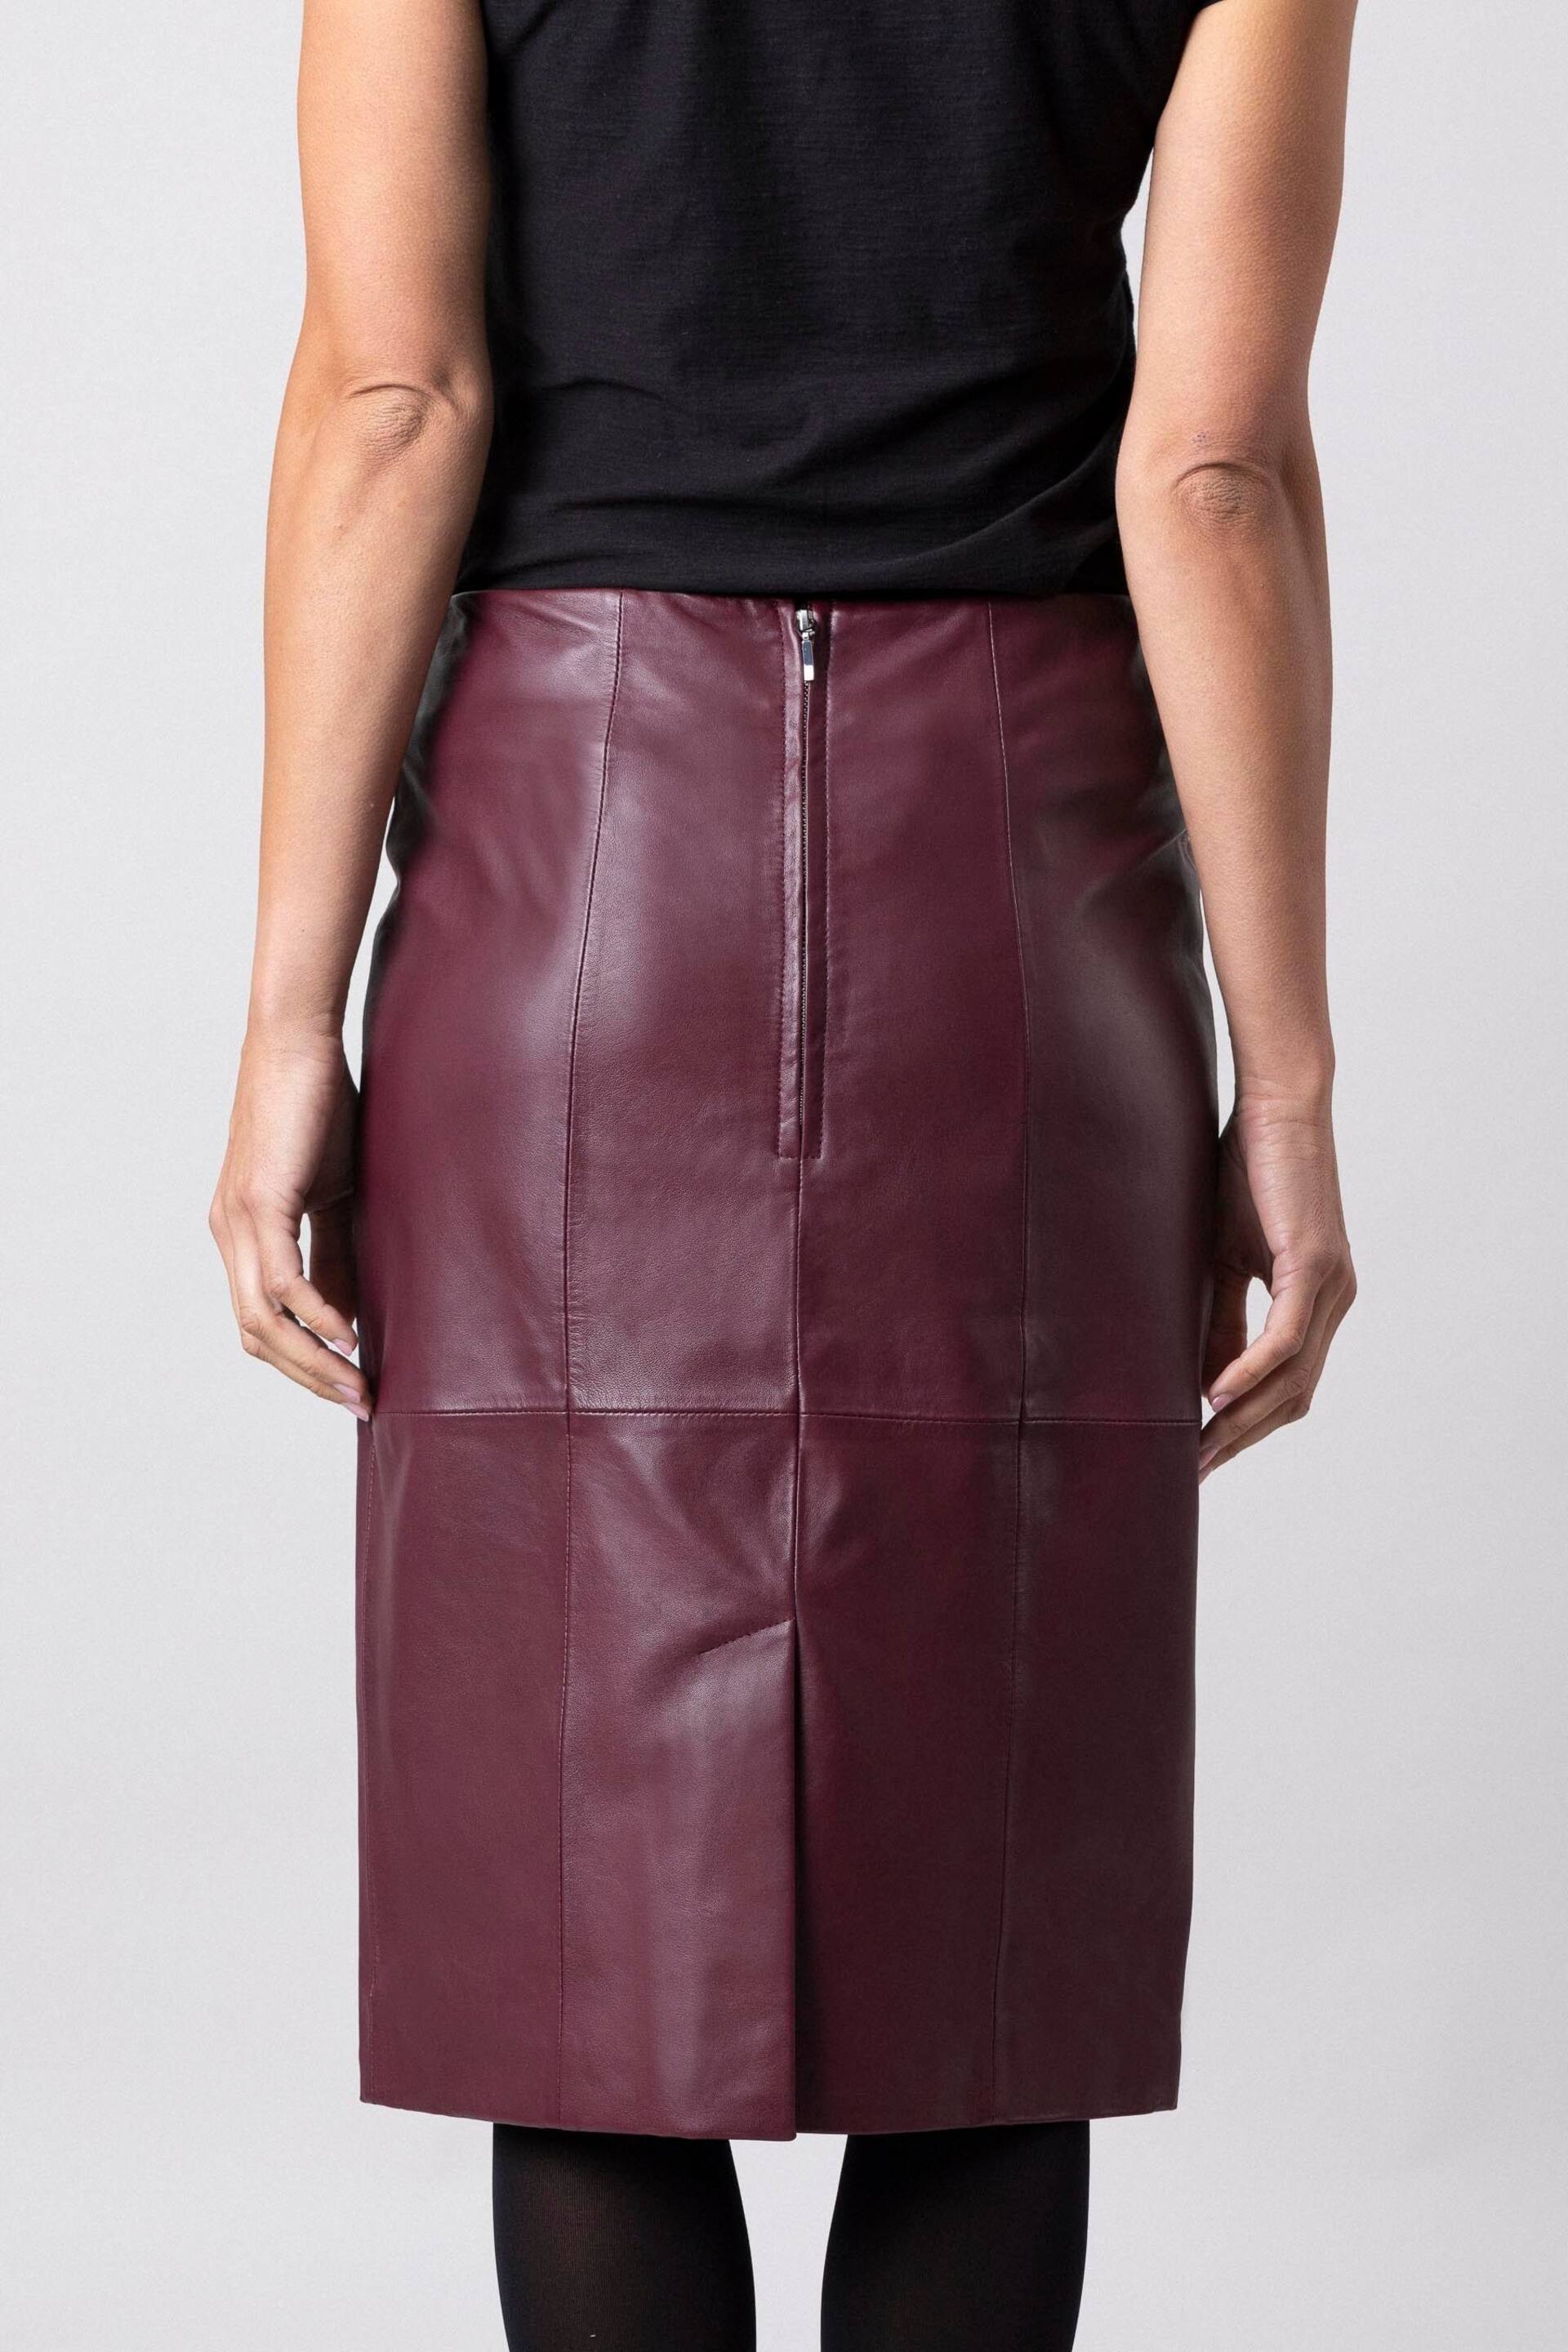 Lakeland Leather High Waisted Leather Pencil Skirt - Image 2 of 8